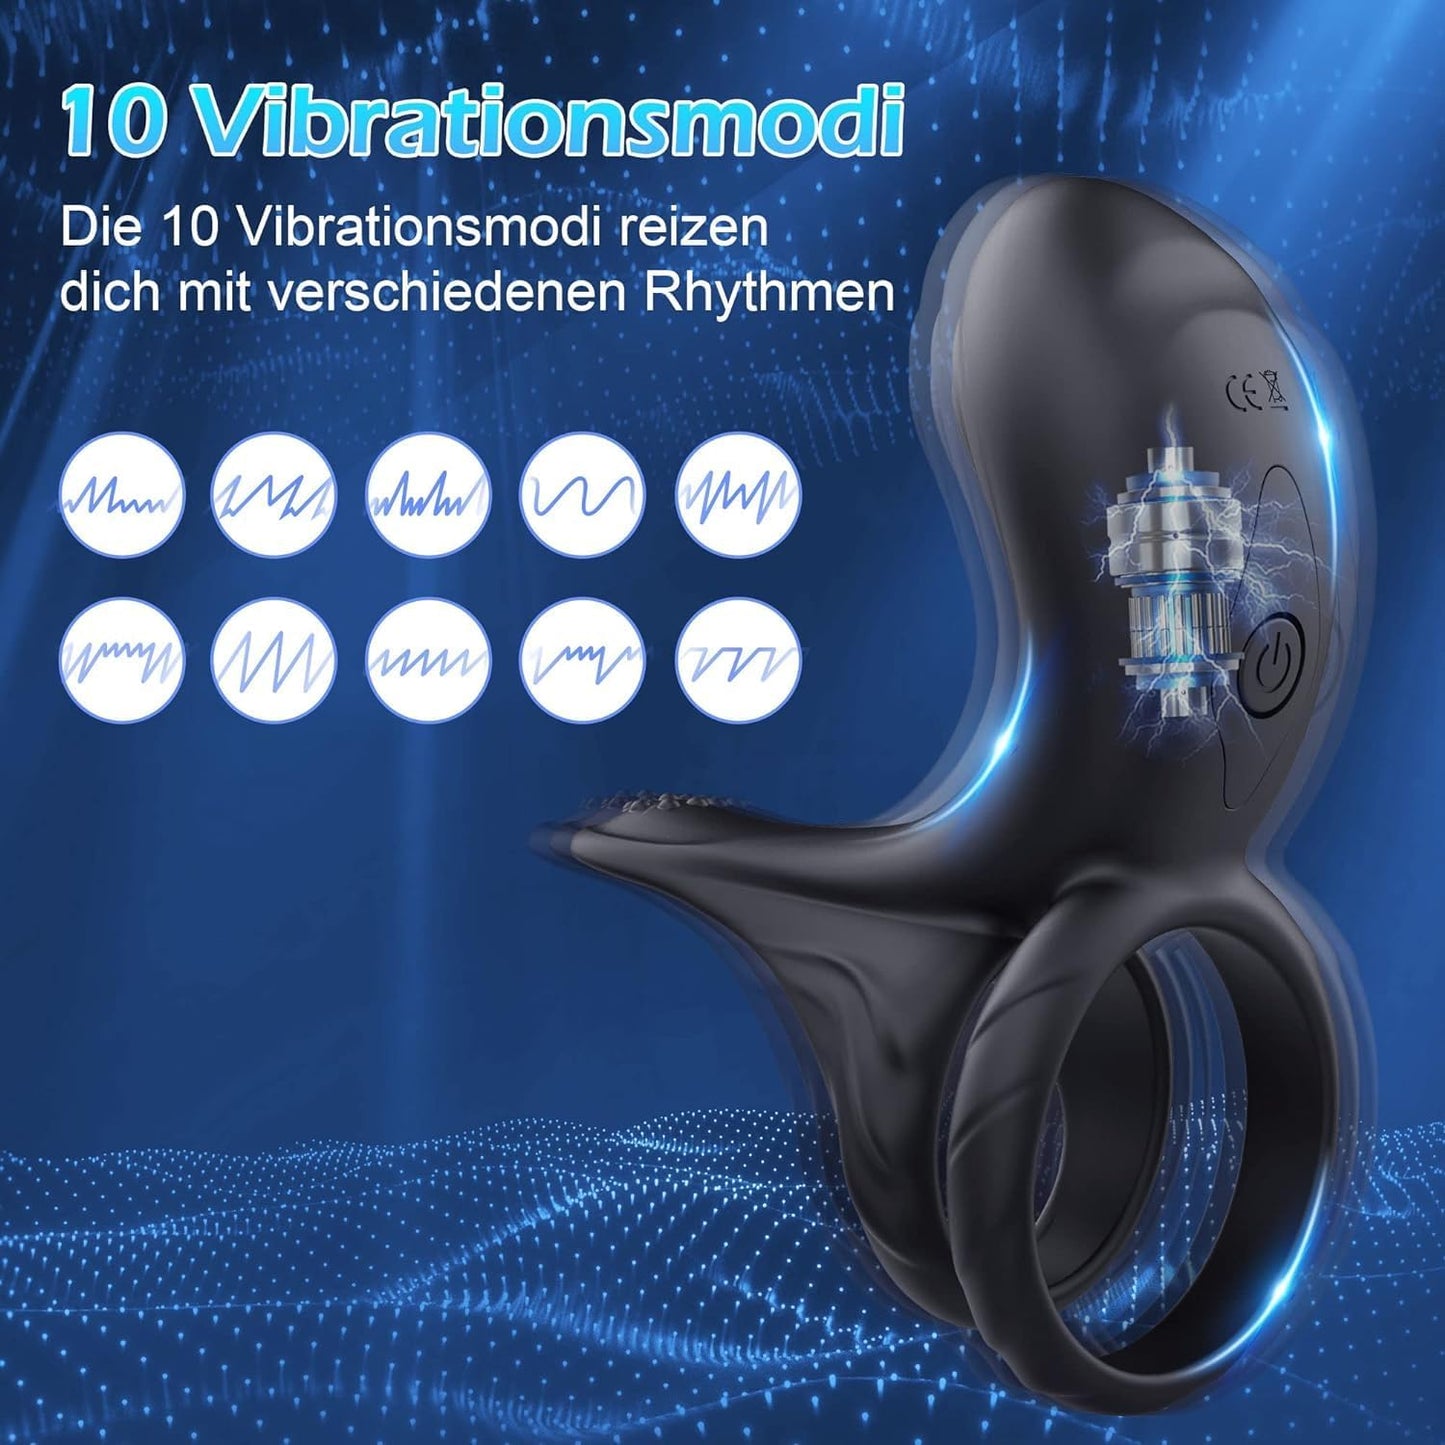 Cock ring clitoris massage penis ring with 10 vibration modes 